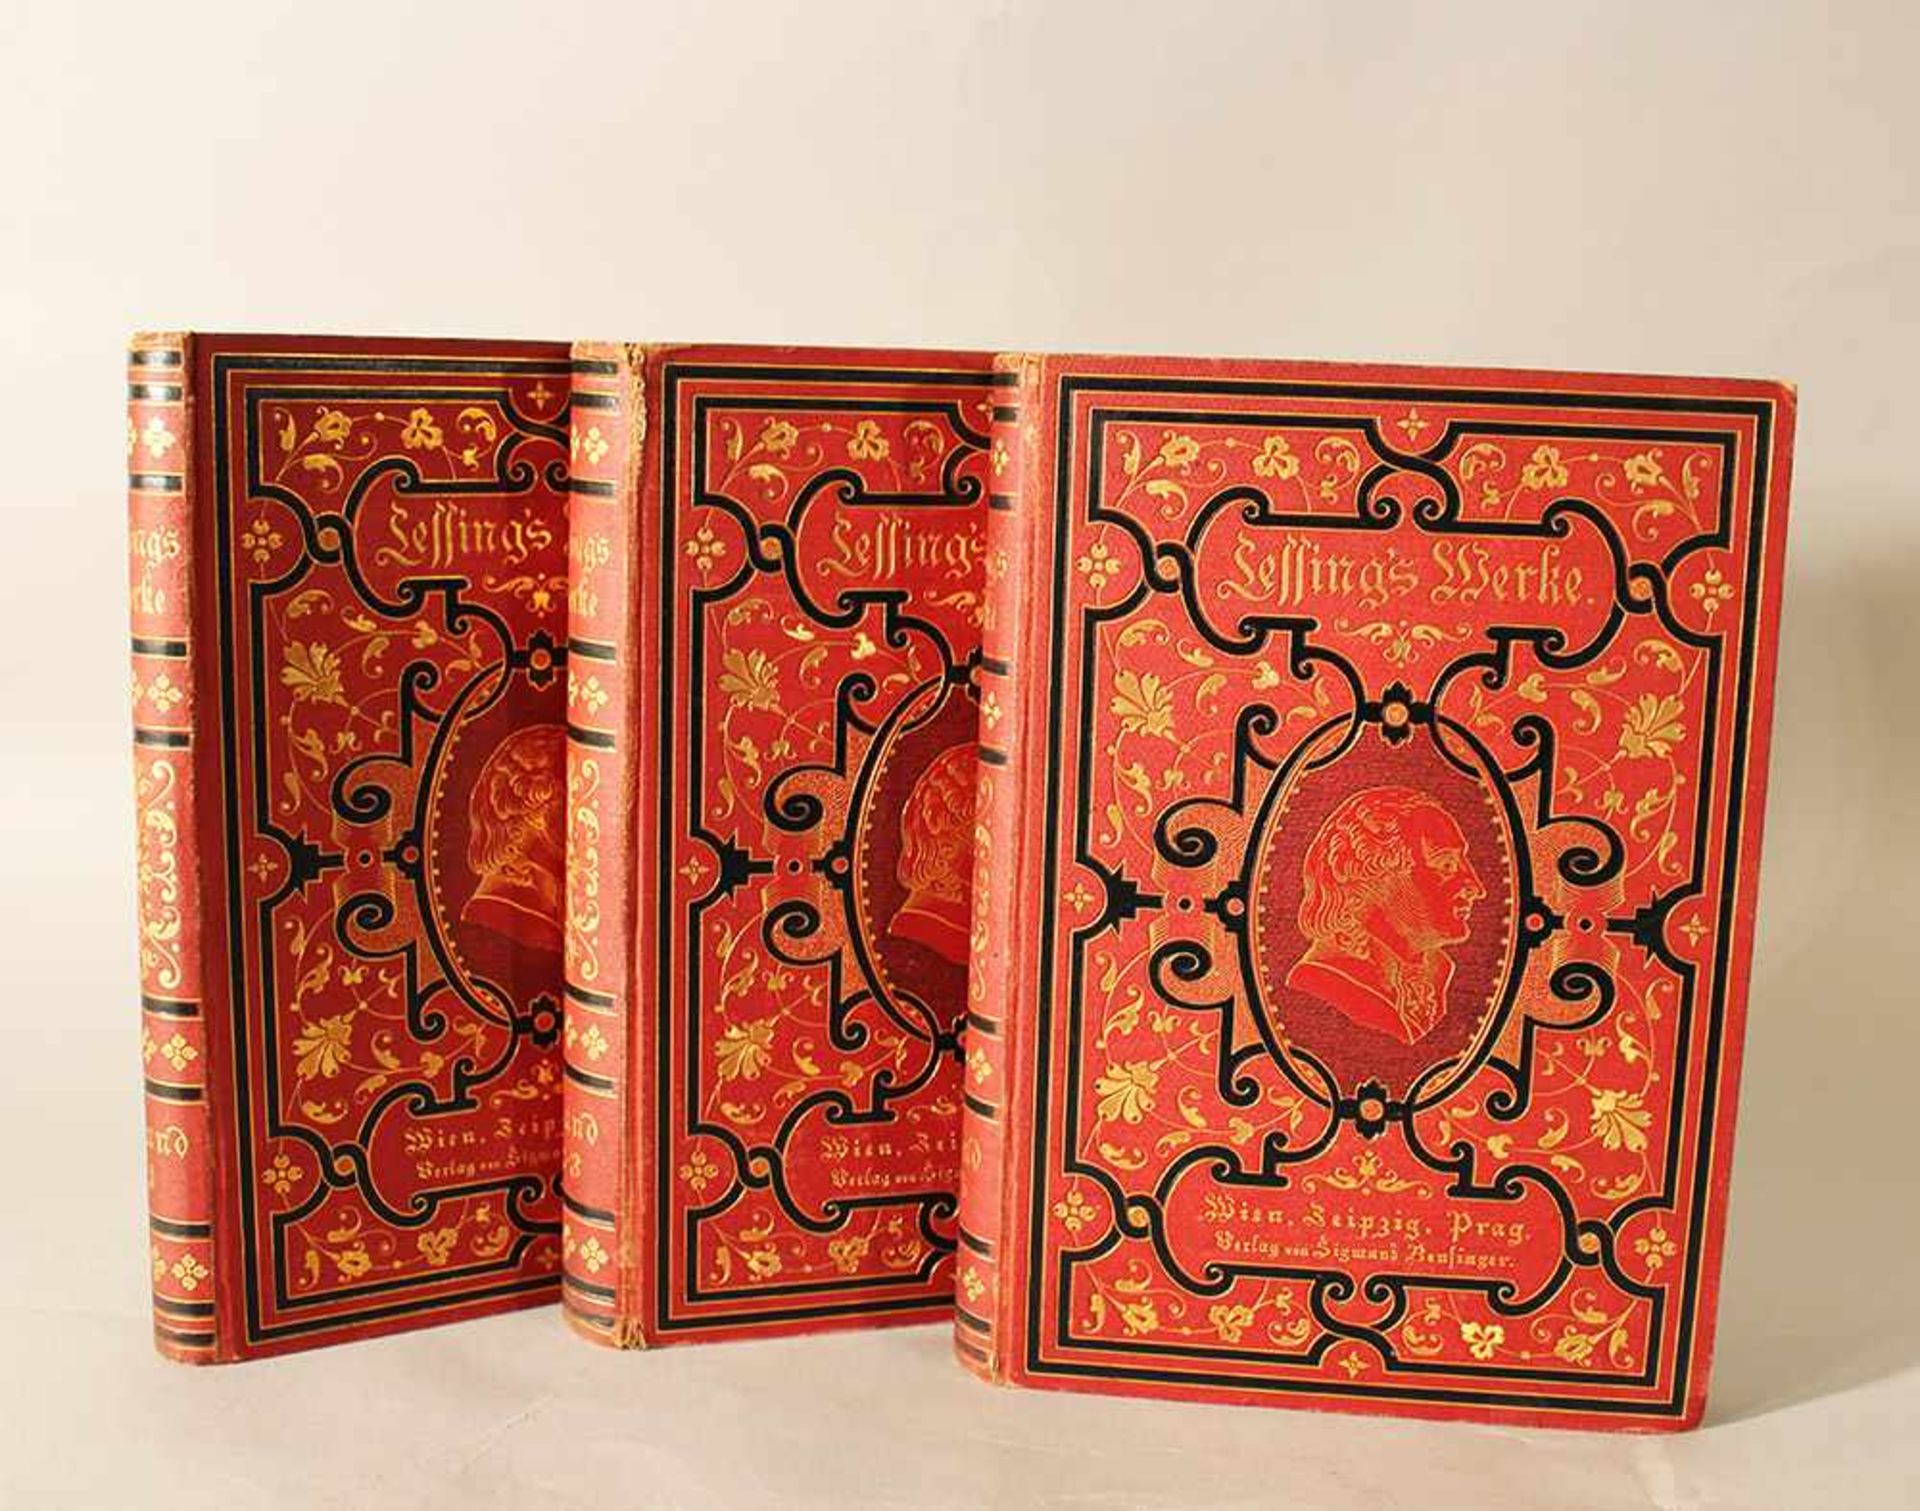 Lessings Werke, edited by Heinrich Laube, published by Sigmund Bensinger, 19th Century. 5 Volumes in